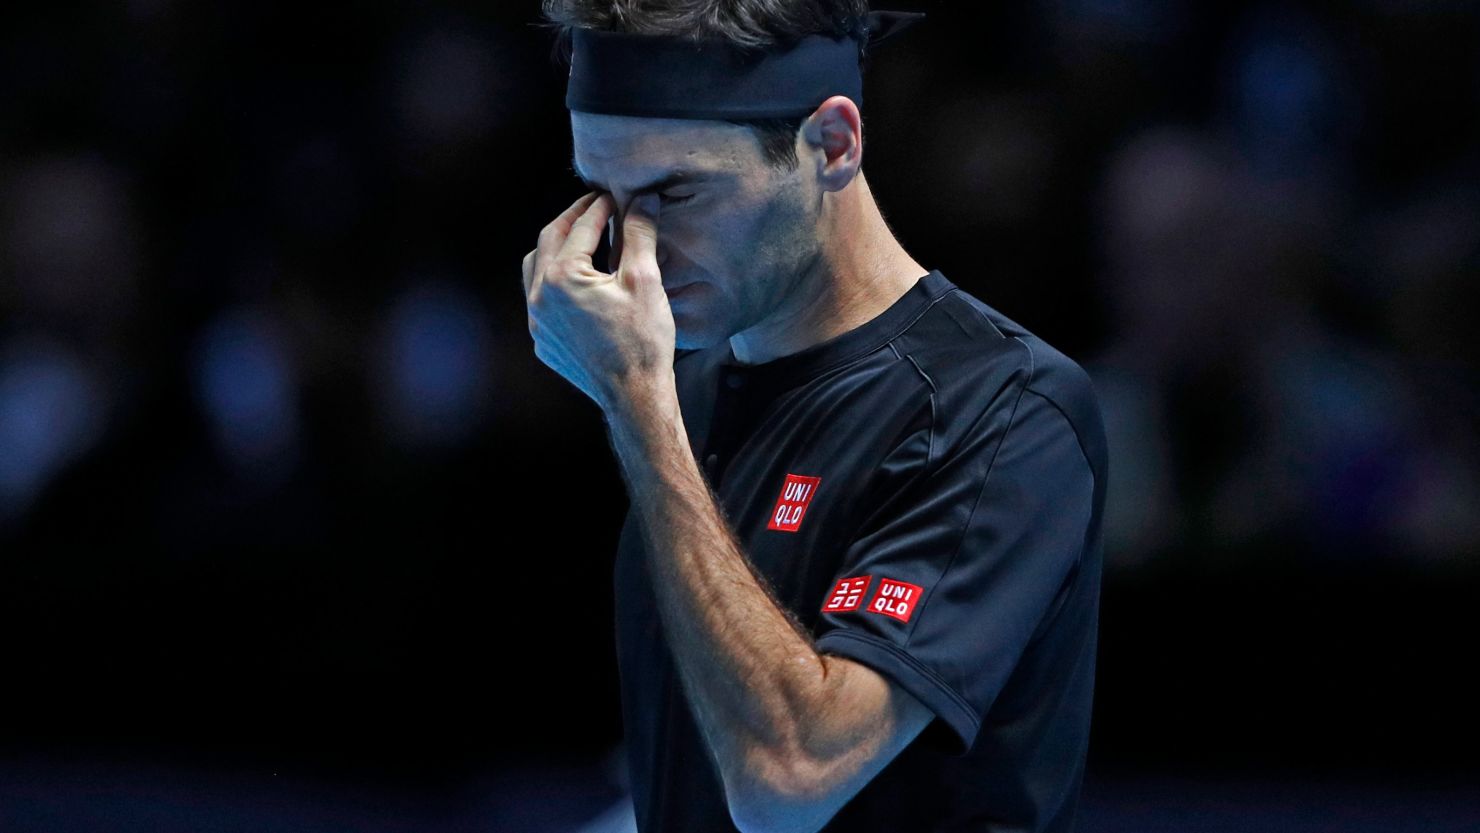 Switzerland's Roger Federer slipped to an opening straight sets defeat to  Austria's Dominic Thiem in their opening round-robin clash at the ATP Finals in London.